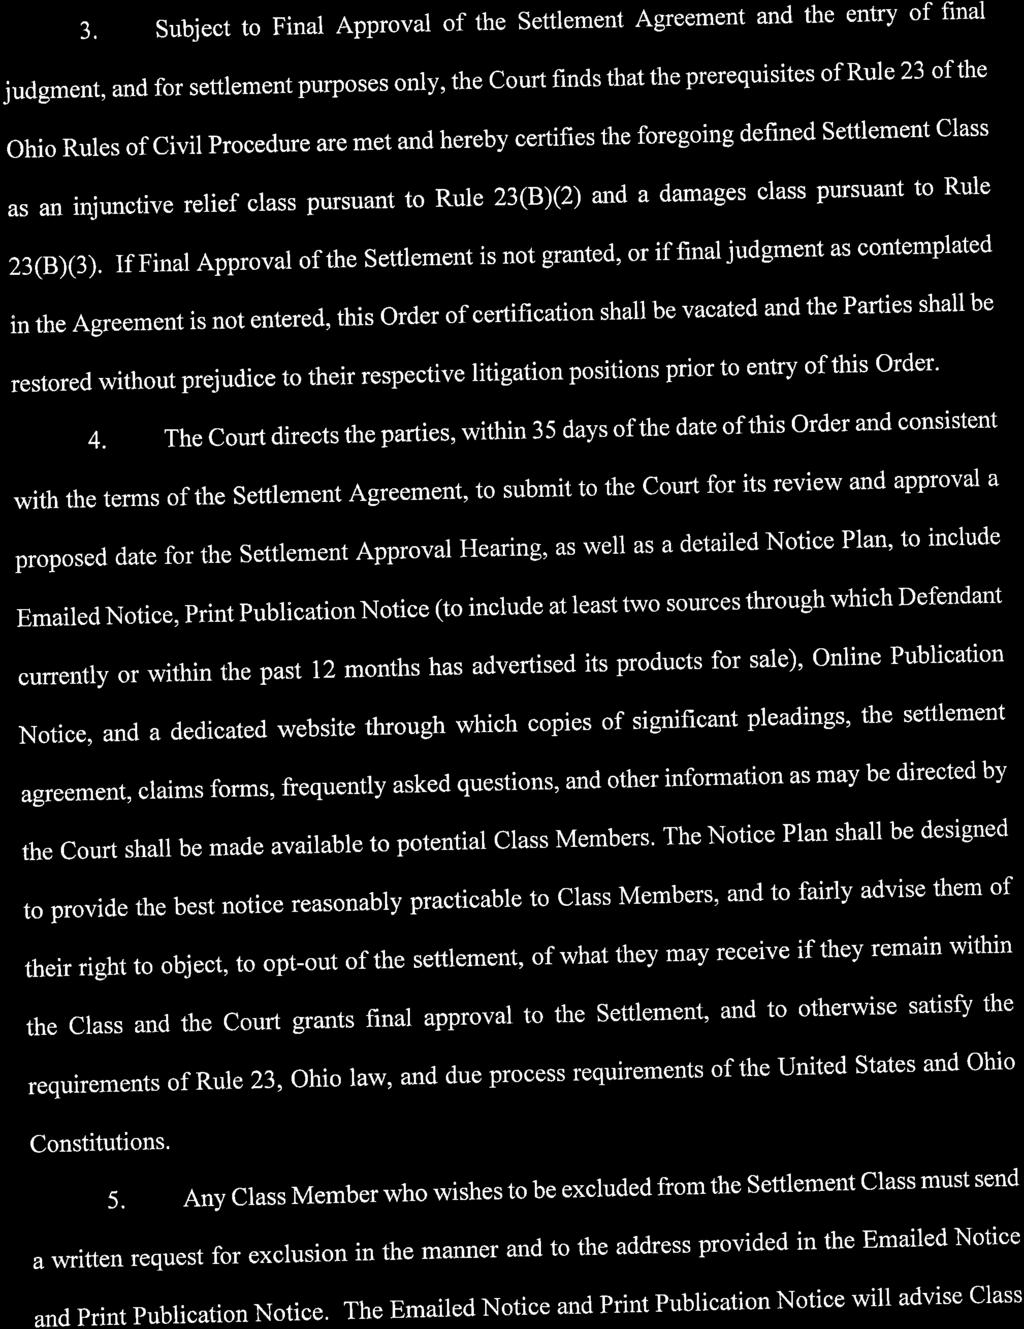 3. Subject to Final Approval of the Settlement Agreement and the entry of final judgment, and for settlement purposes only, the Court finds that the prerequisites of Rule 23 of the Ohio Rules of